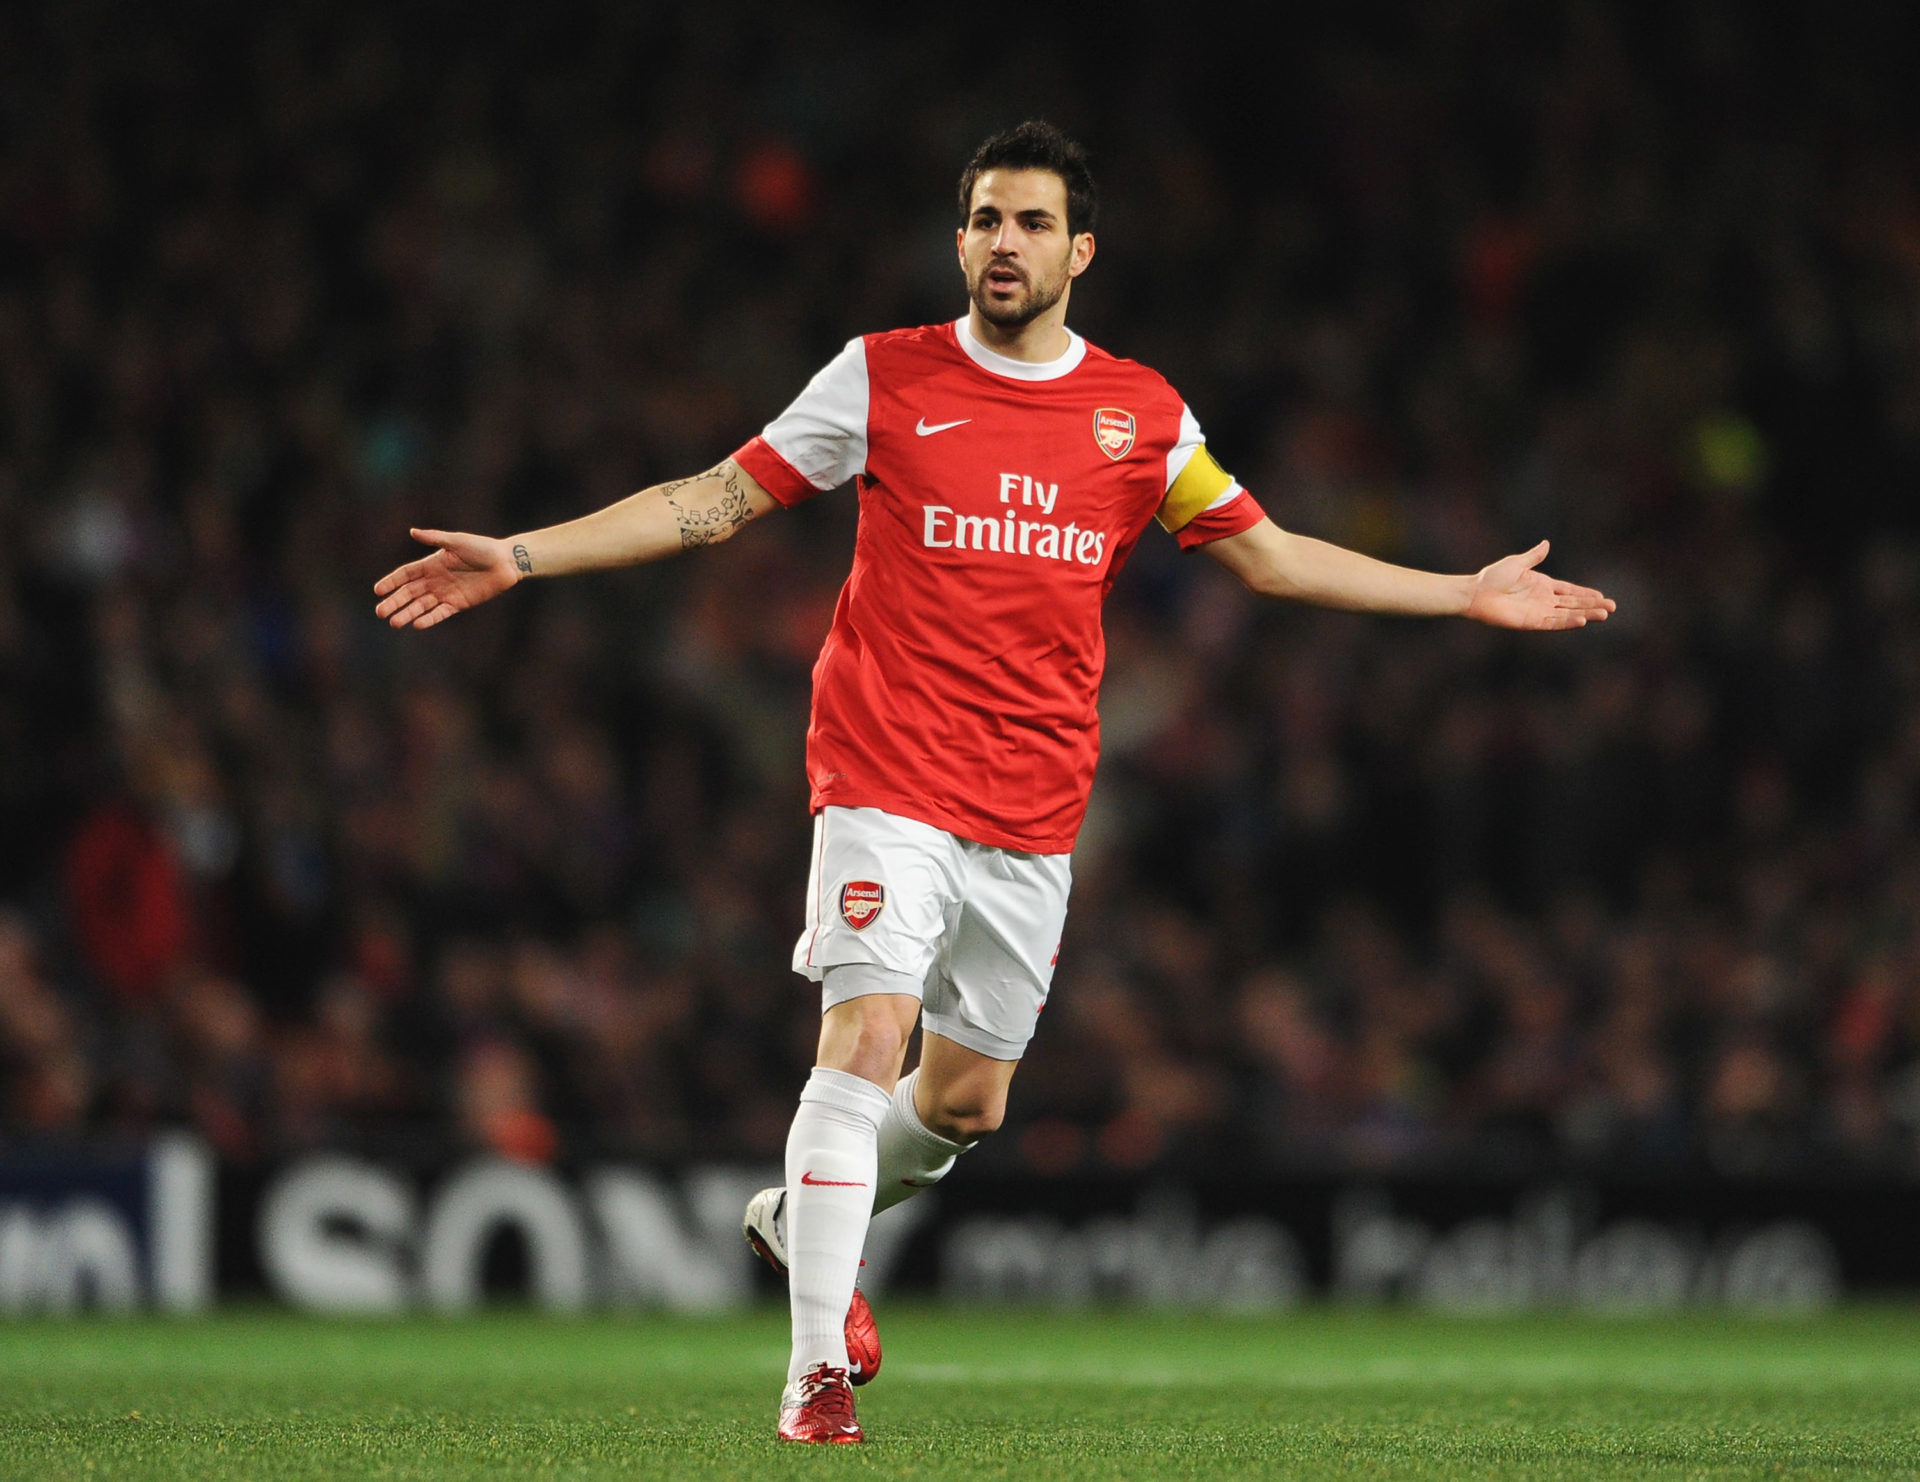 Cesc Fabregas of Arsenal shows his frustration during the UEFA Champions League round of 16 first leg match between Arsenal and Barcelona at the Em...